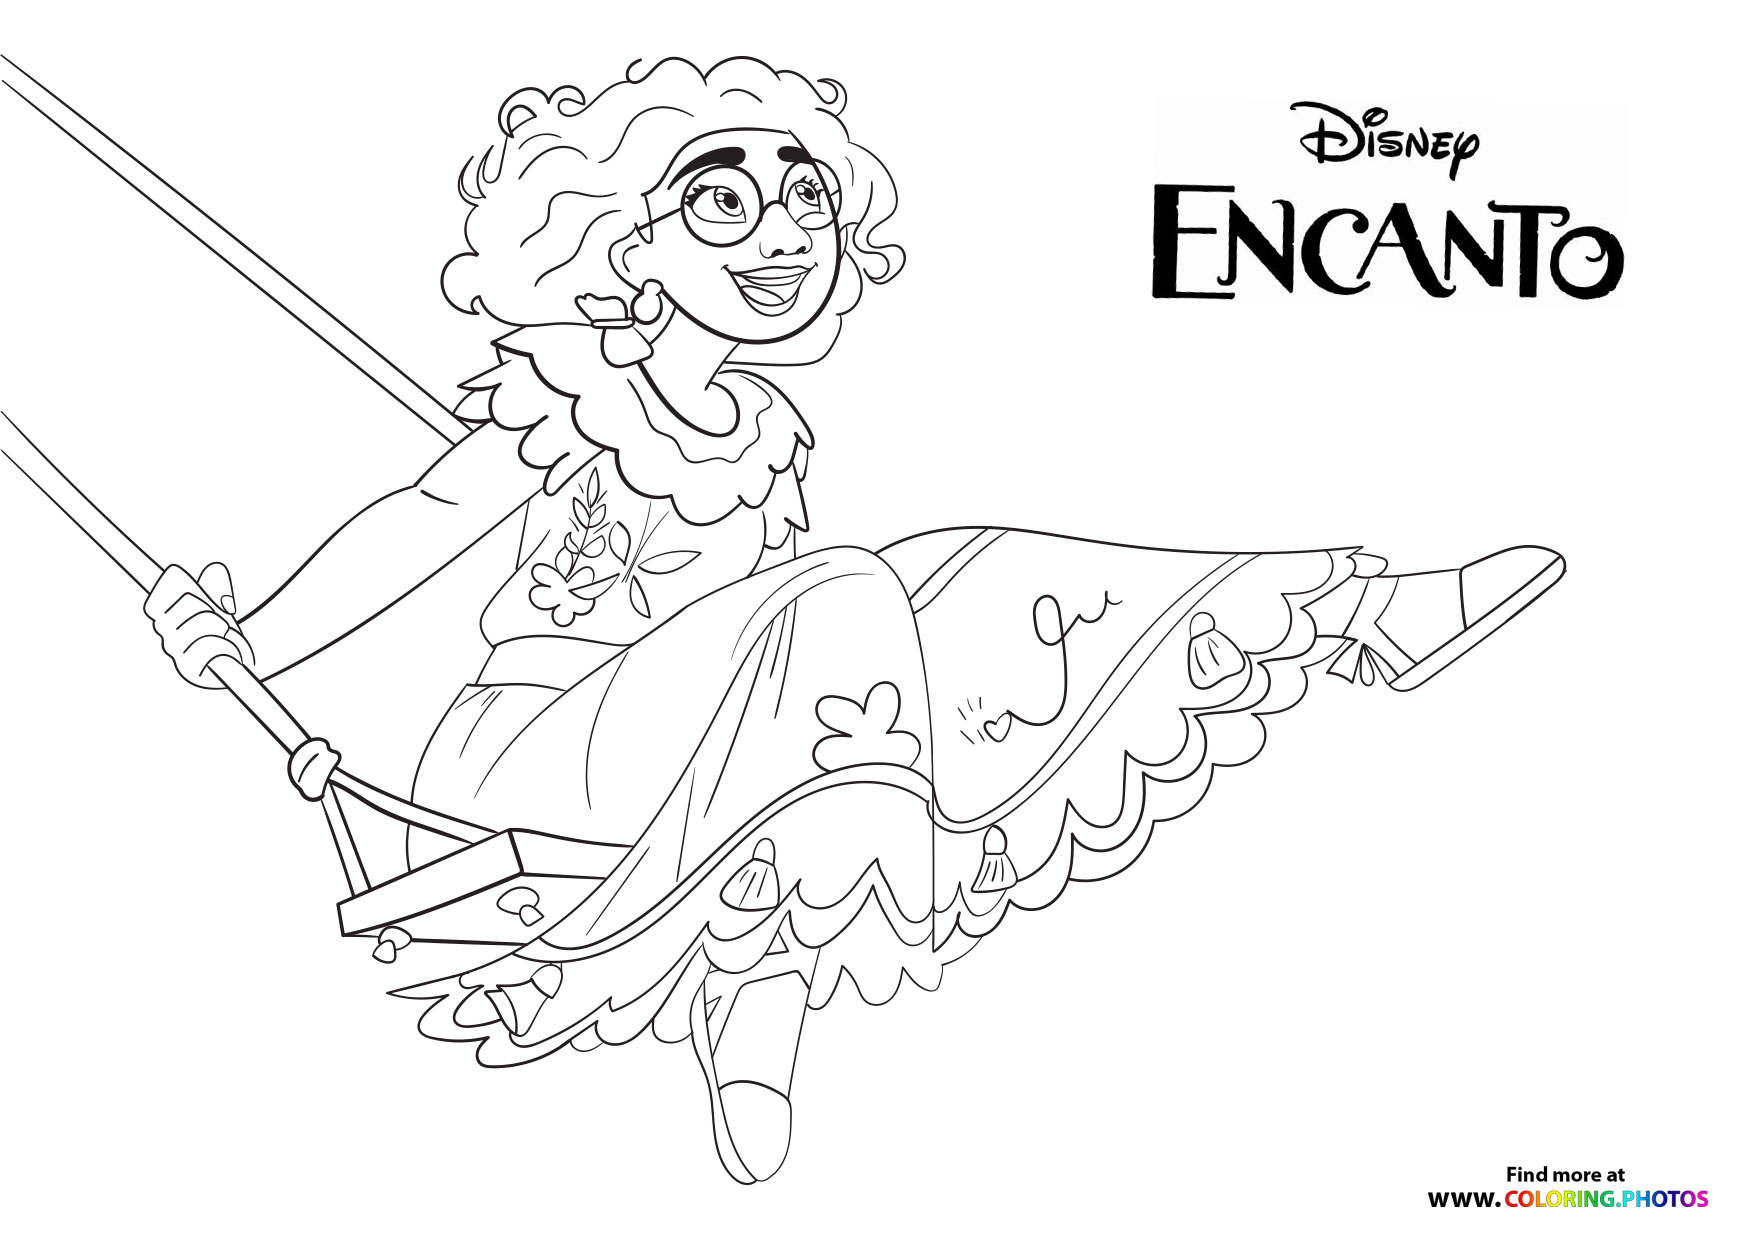 Encanto Mirabel on a swing   Coloring Pages for kids